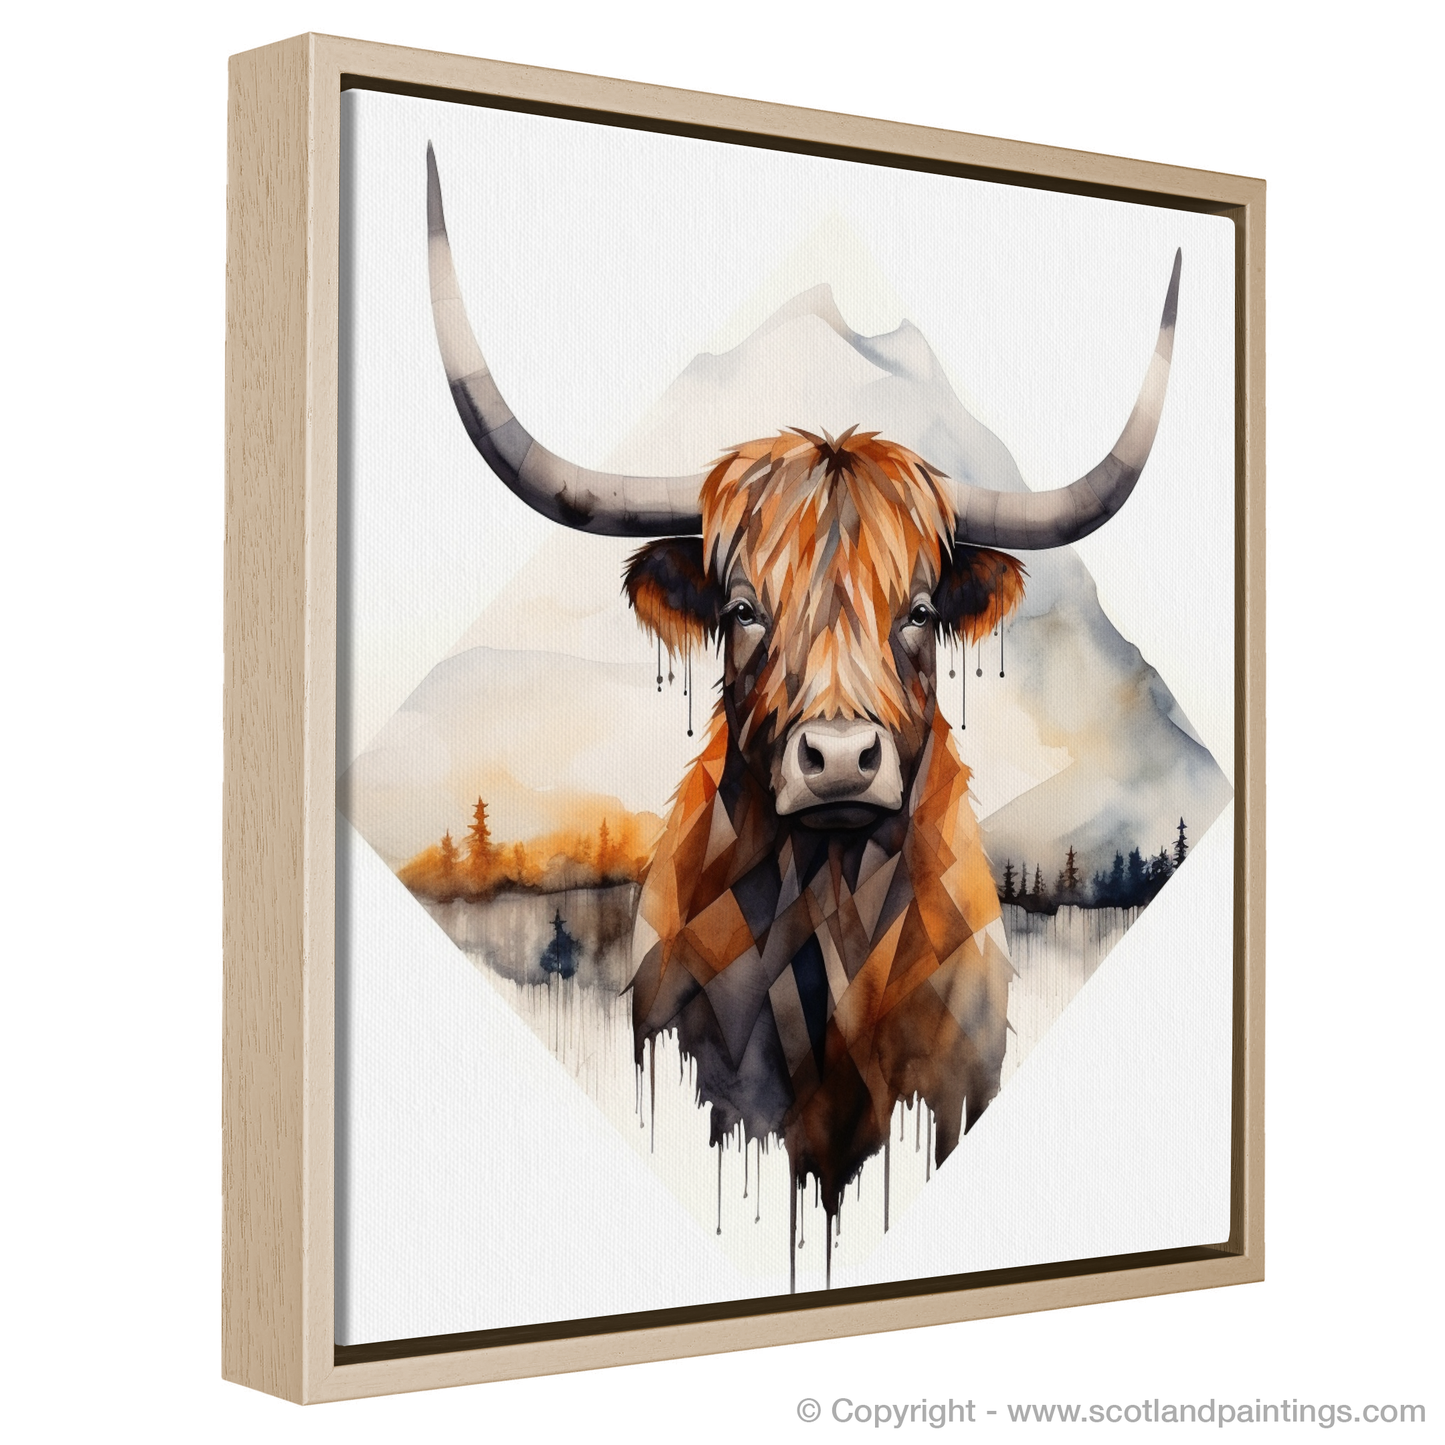 Highland Serenity: A Minimalist Tribute to Scotland's Iconic Cow